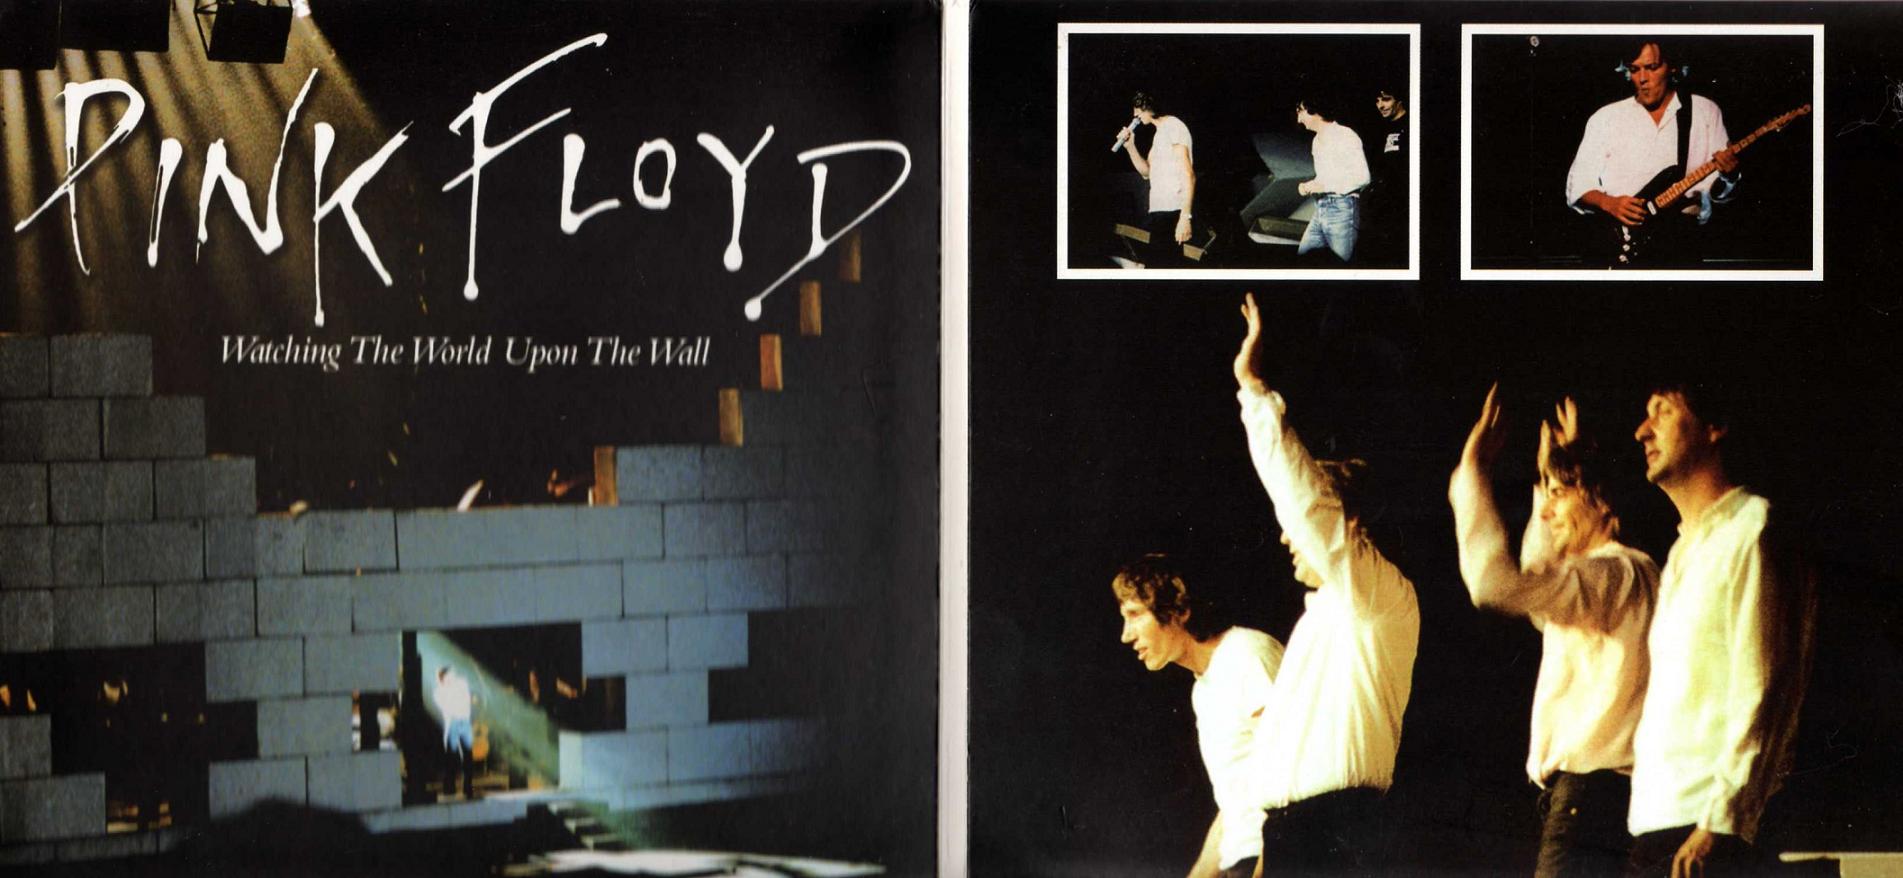 1981-06-16-watching-the-world-upon-the-wall-booklet2